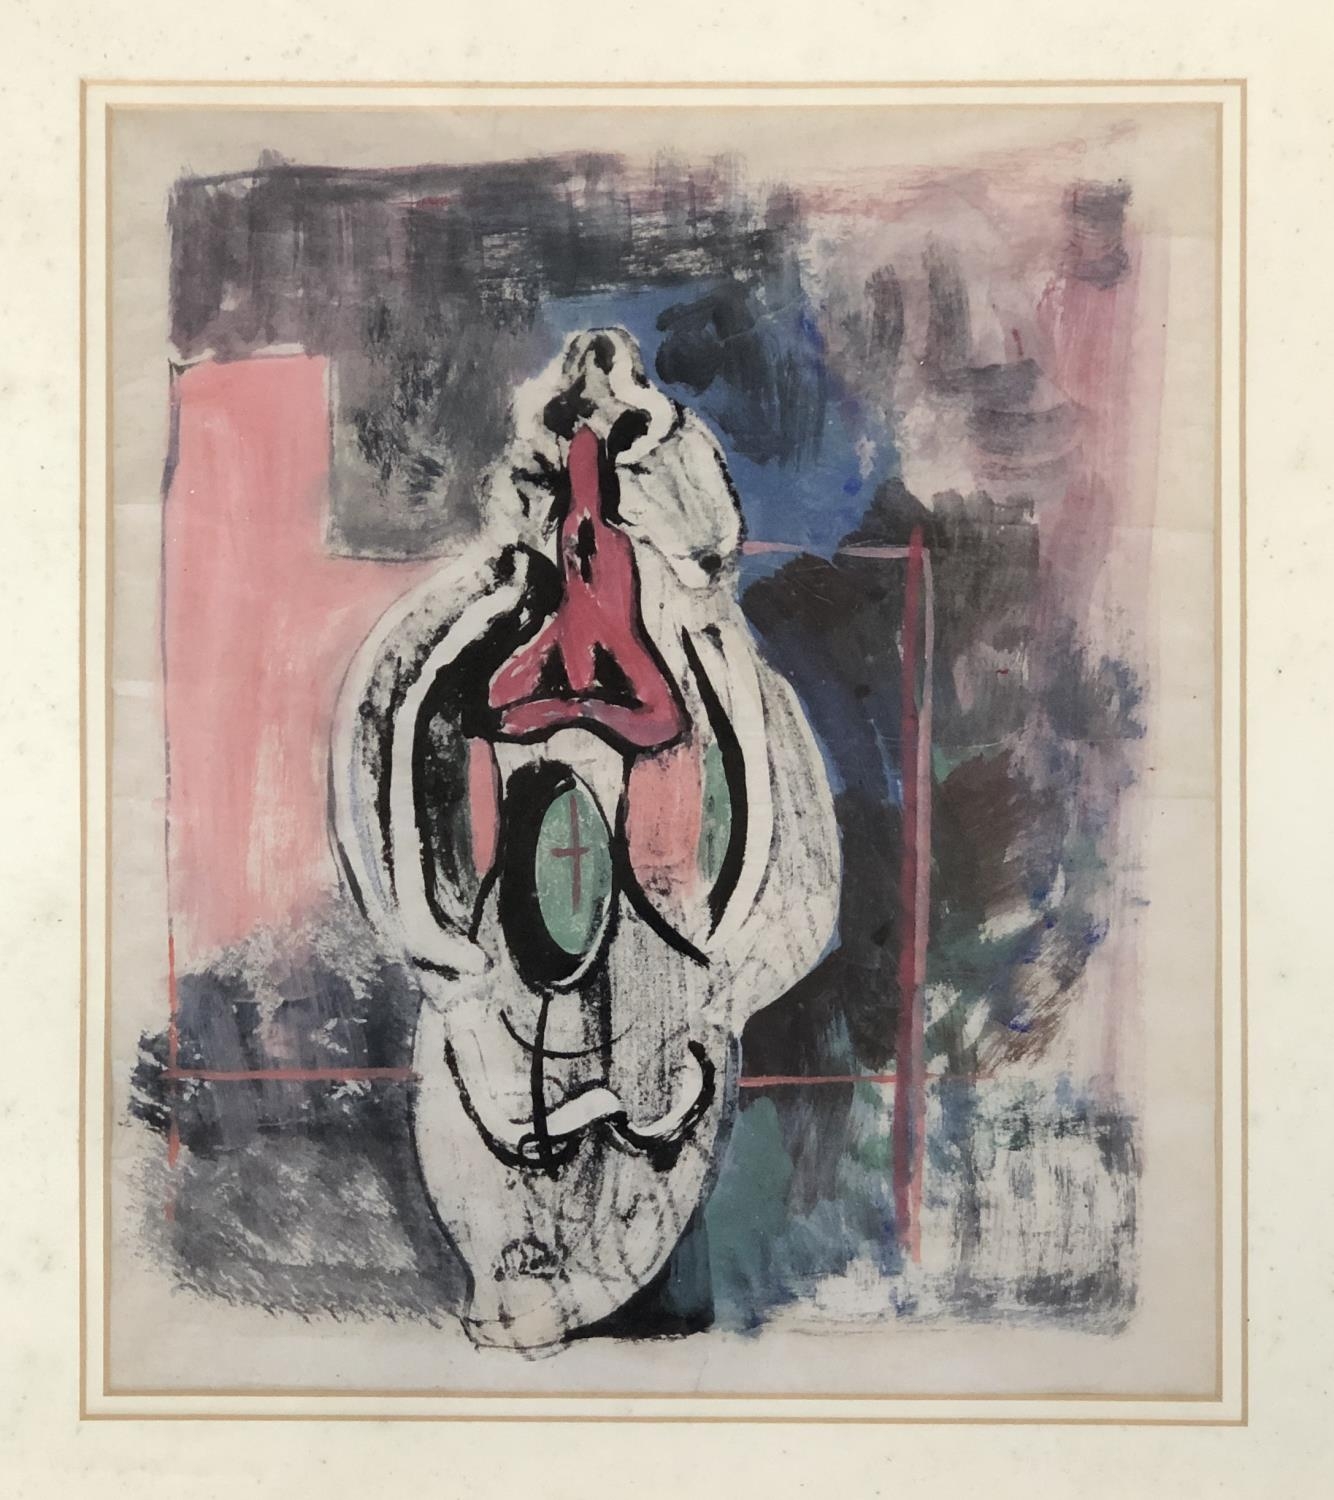 Julius B. Stafford-Baker (1904-1988), abstract form in pink, mixed media, 36x31cm - Image 2 of 2